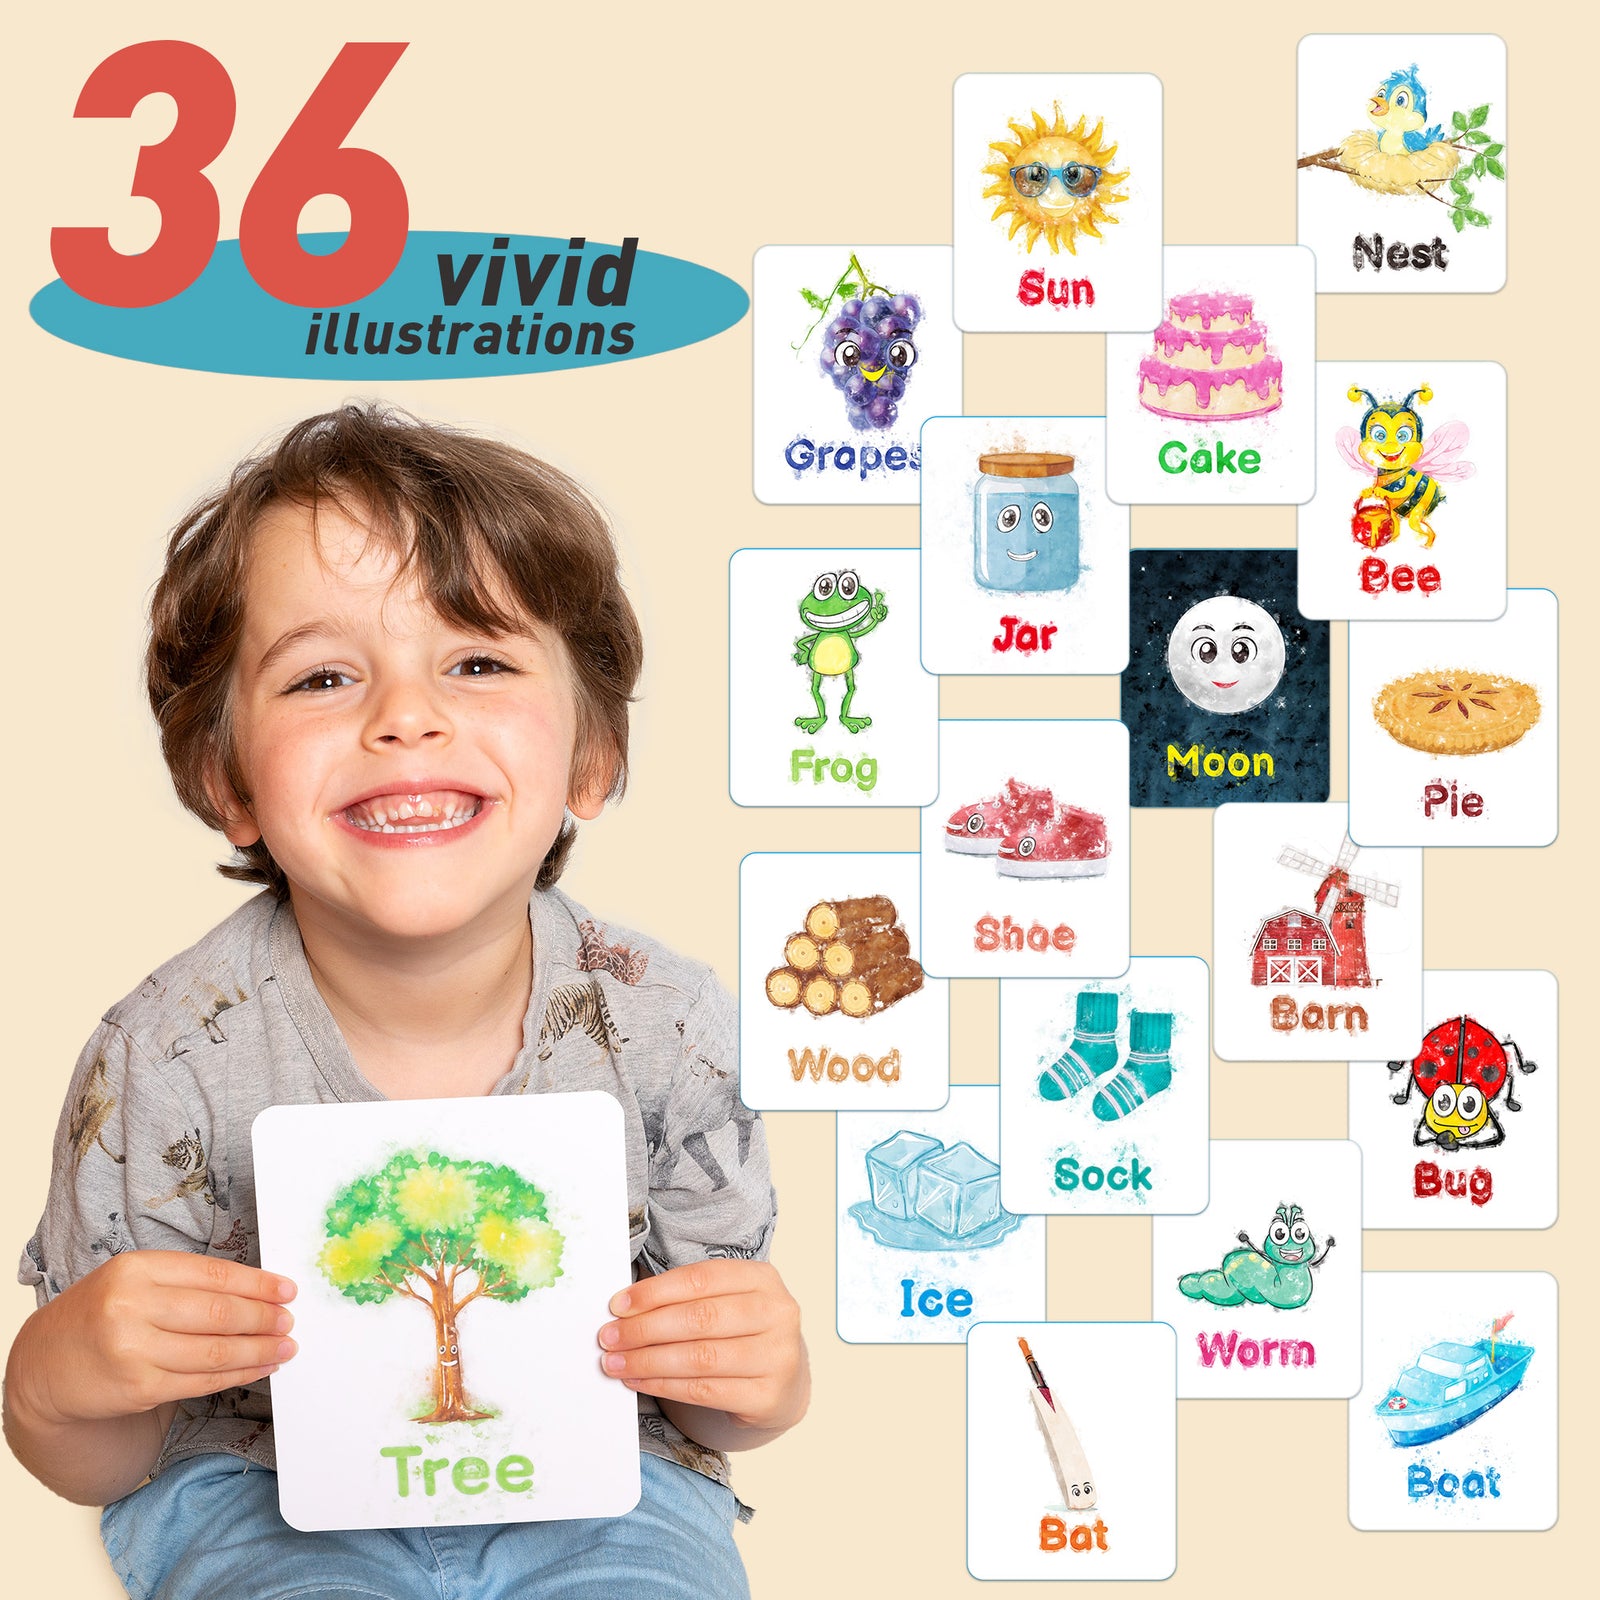 Spelling Game for Kids, Montessori Educational Toy for 3+ Year Old Pre-K Toddler Includes 8 Wooden Blocks and Illustrated Cards, Alphabet Learning Toy Boosts Brain Development, Hand-Eye Coordination - Axel Adventures